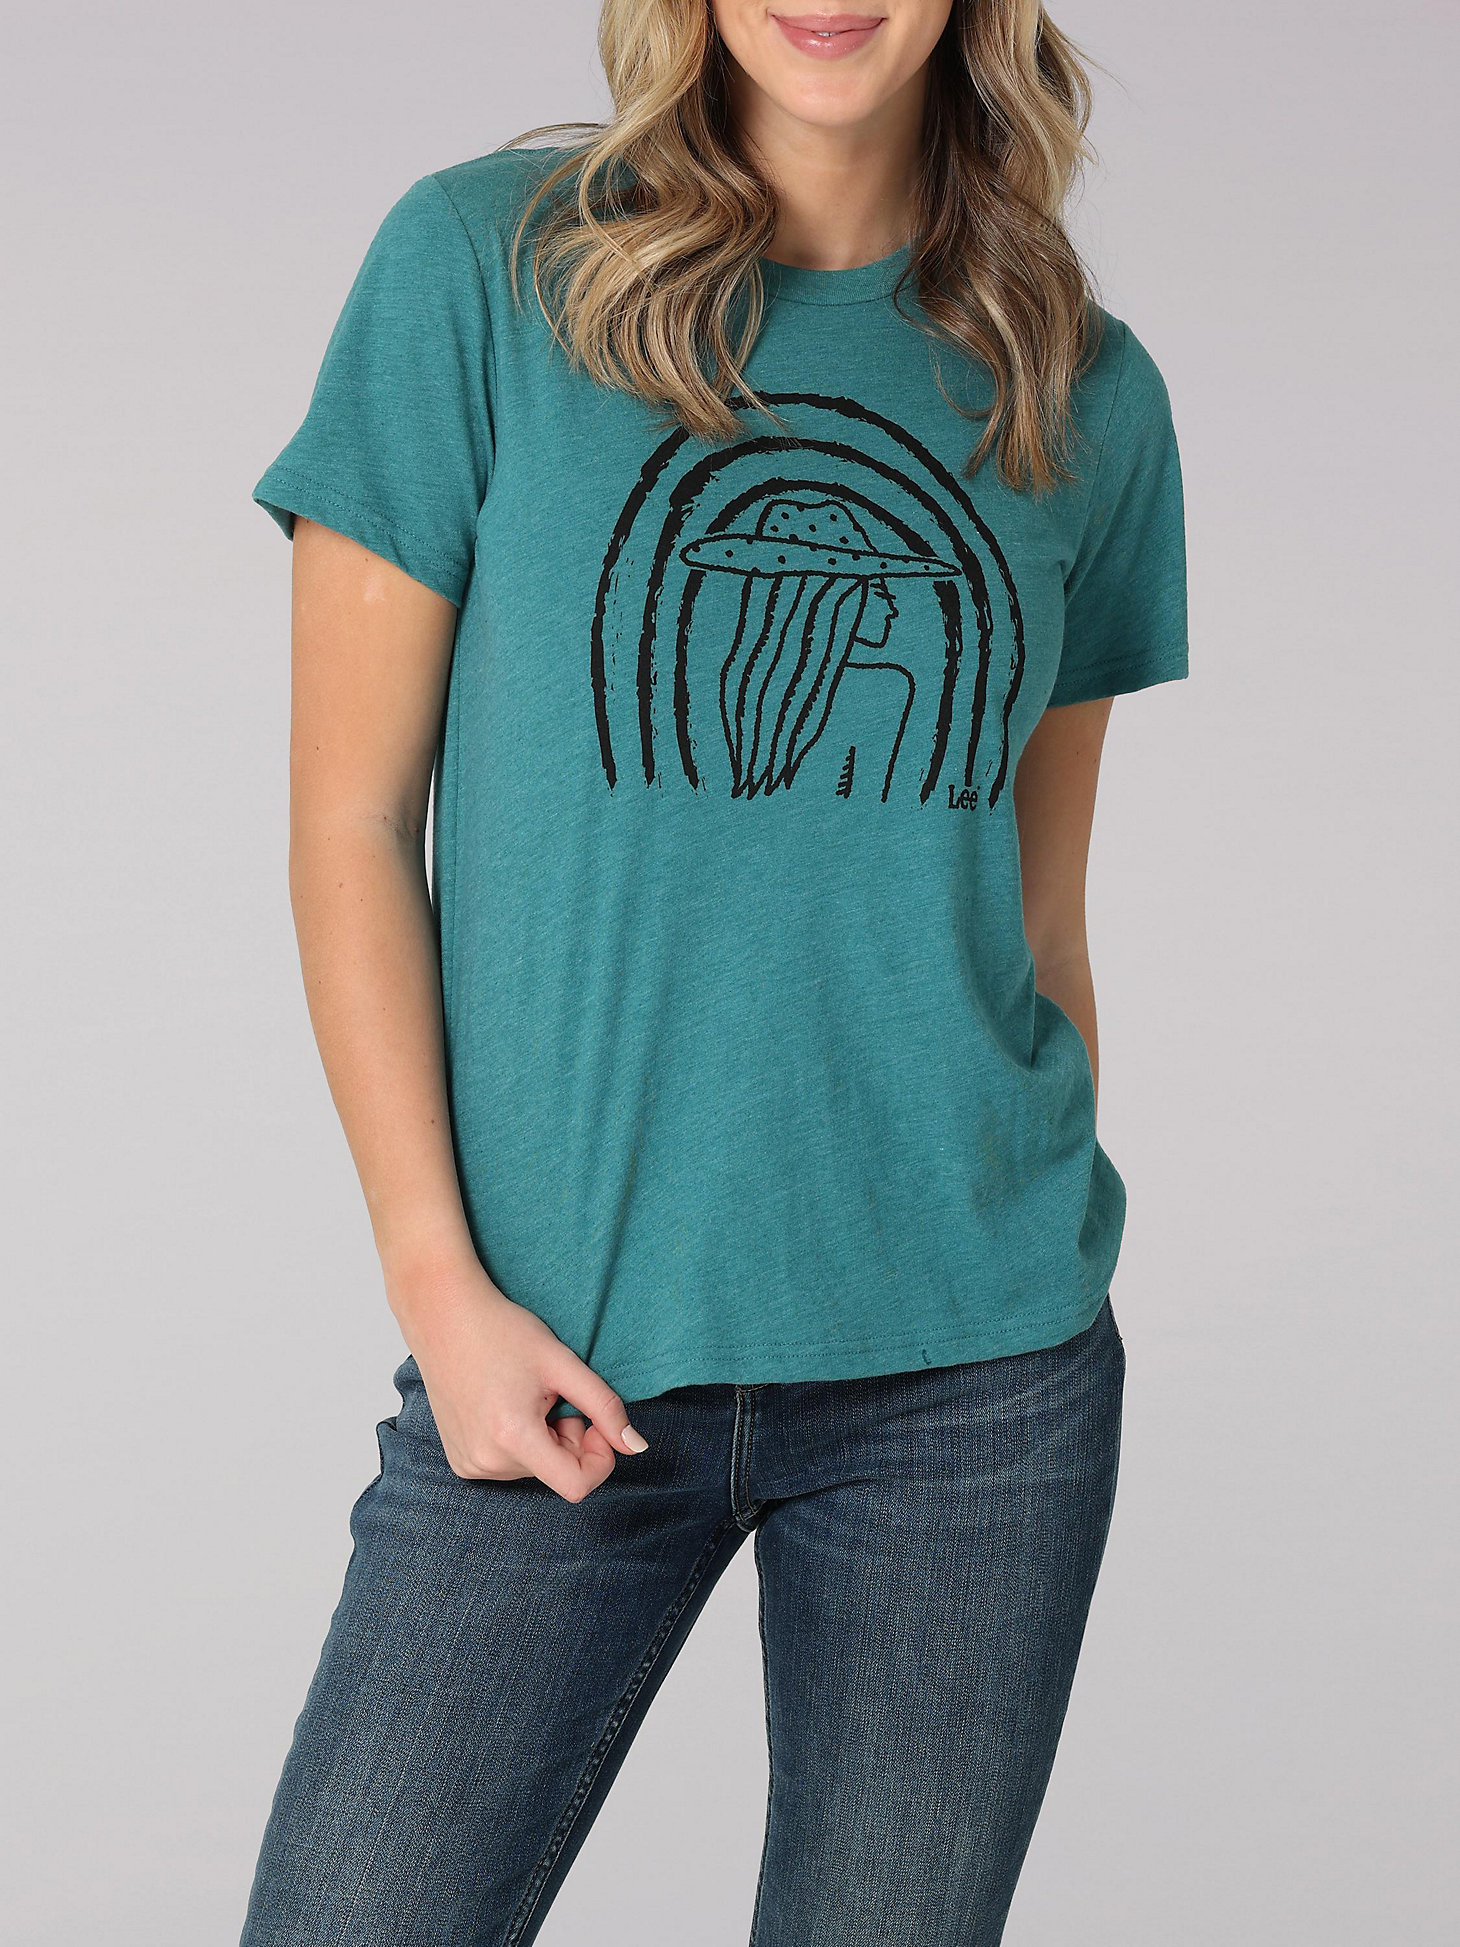 Women's Lee Lady Graphic Tee in Midway Teal Heather main view